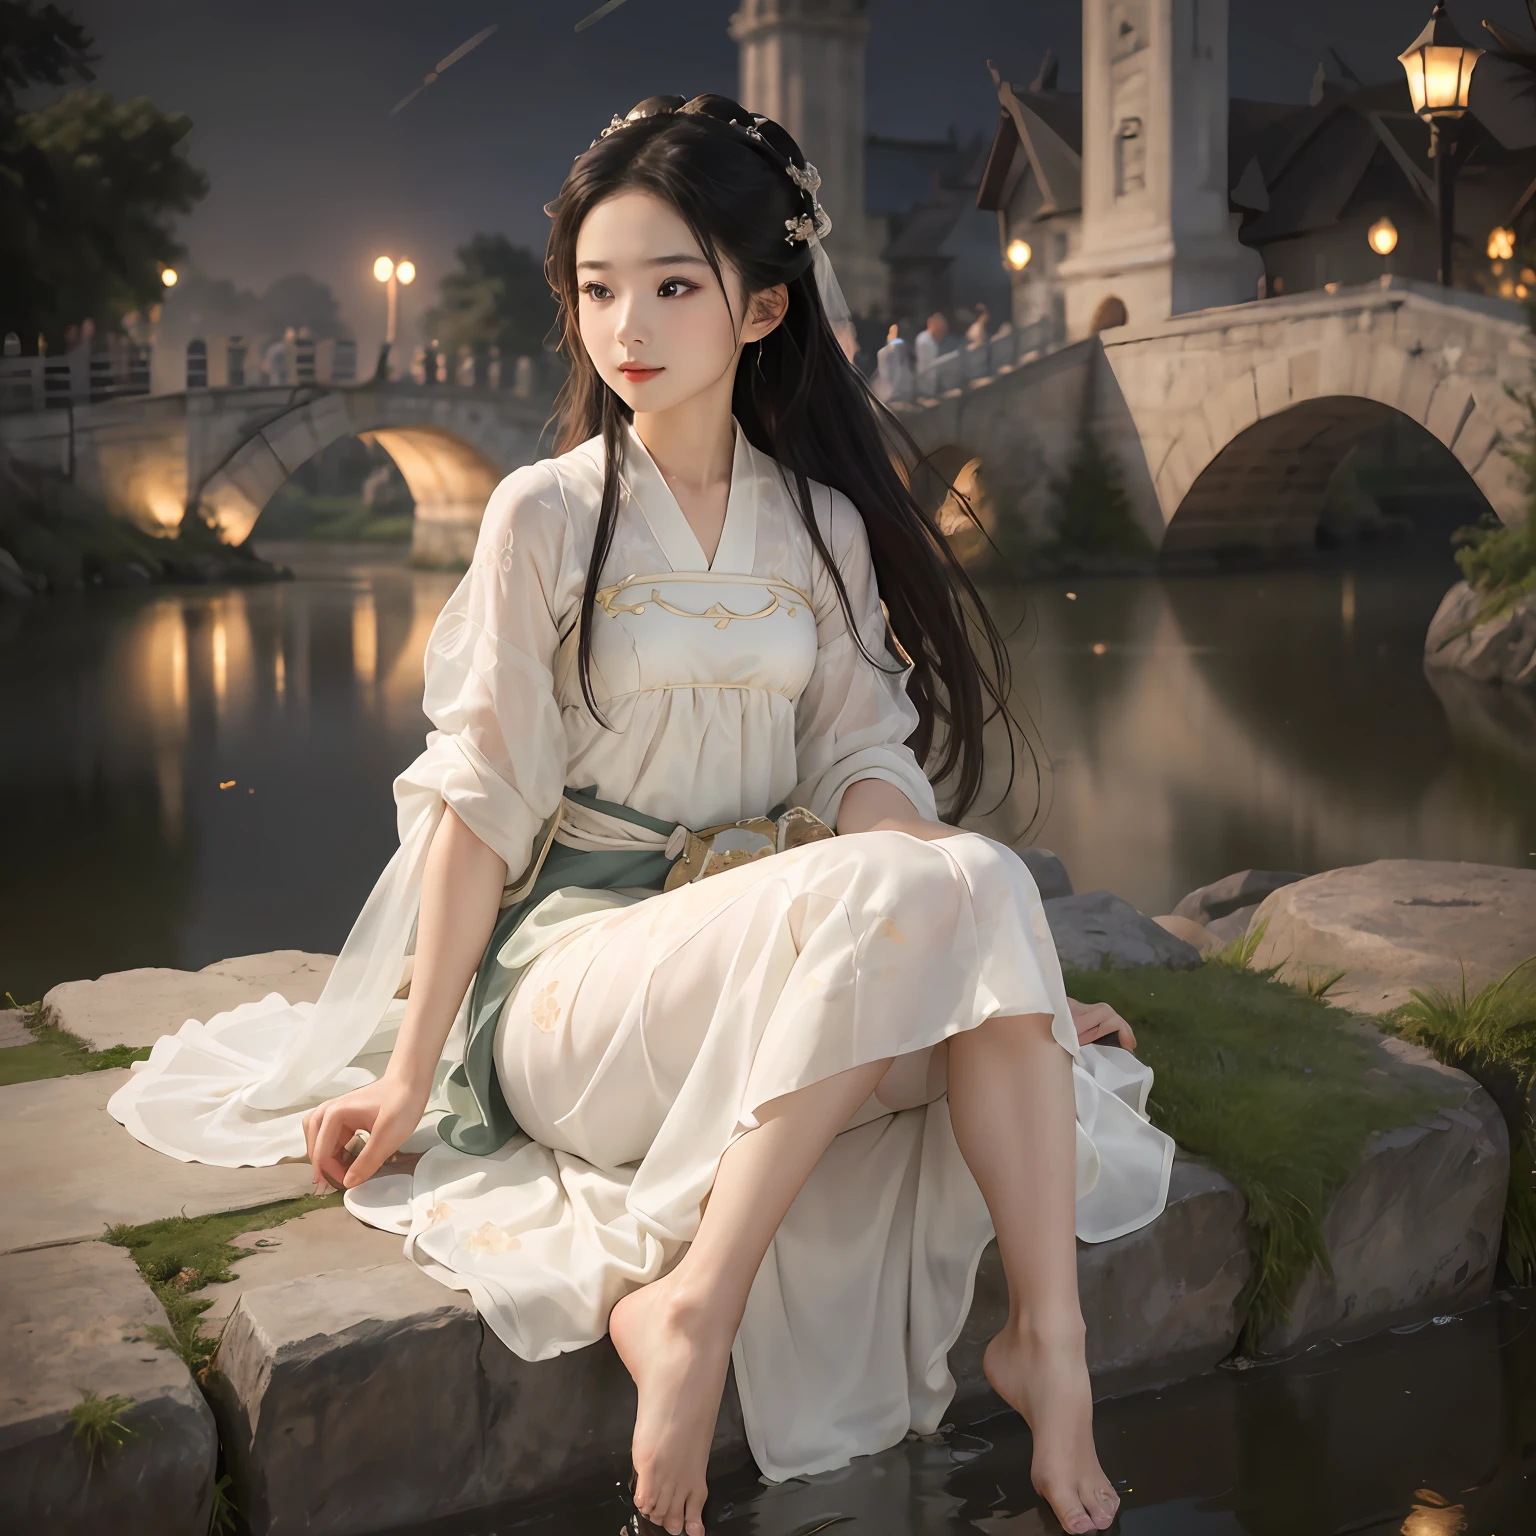 Sit on a stone bridge by the river， florals，Lanterns，Big wind，  Long hair to the waist, （Long hair flying: 1.6），Large bust， Don costume, Han clothing. (((Night: 1.9)))，ssmile,shyexpression，Tulle translucent Hanfu, Bare feet, silver trinkets, Lightweight, self-assured, Artistry, Beauty, (Best quality), Masterpiece, high light, (Original), extremelydetailedwallpaper, (Original: 1.5), (Masterpiece: 1.3), (high resolution: 1.3), (Very detailed 32k wallpaper: 1.3), (Best quality), Highest image quality, exquisite CG, High quality, High completion rate, Depth of field, (1 girl: 1.5), (An extremely delicate and beautiful girl: 1.5), (Perfect full body detail: 1.5), Beautiful and delicate nose, Beautiful and delicate lips, Beautiful and delicate eyes, (Clear eyes: 1.3), Beautiful and delicate facial features, Beautiful and delicate face, Hand processing, Hand optimization, Hand detail optimization, Handmade details, Beautiful clothes down to the smallest detail, Complex details, extreme detail portrayal, hdr, Detailed background, Realistic,1girll,Girl,Chinese art,Super long legs,Hanfu,is shy,Shy,Chinese clothes,Hanfu，legs separated